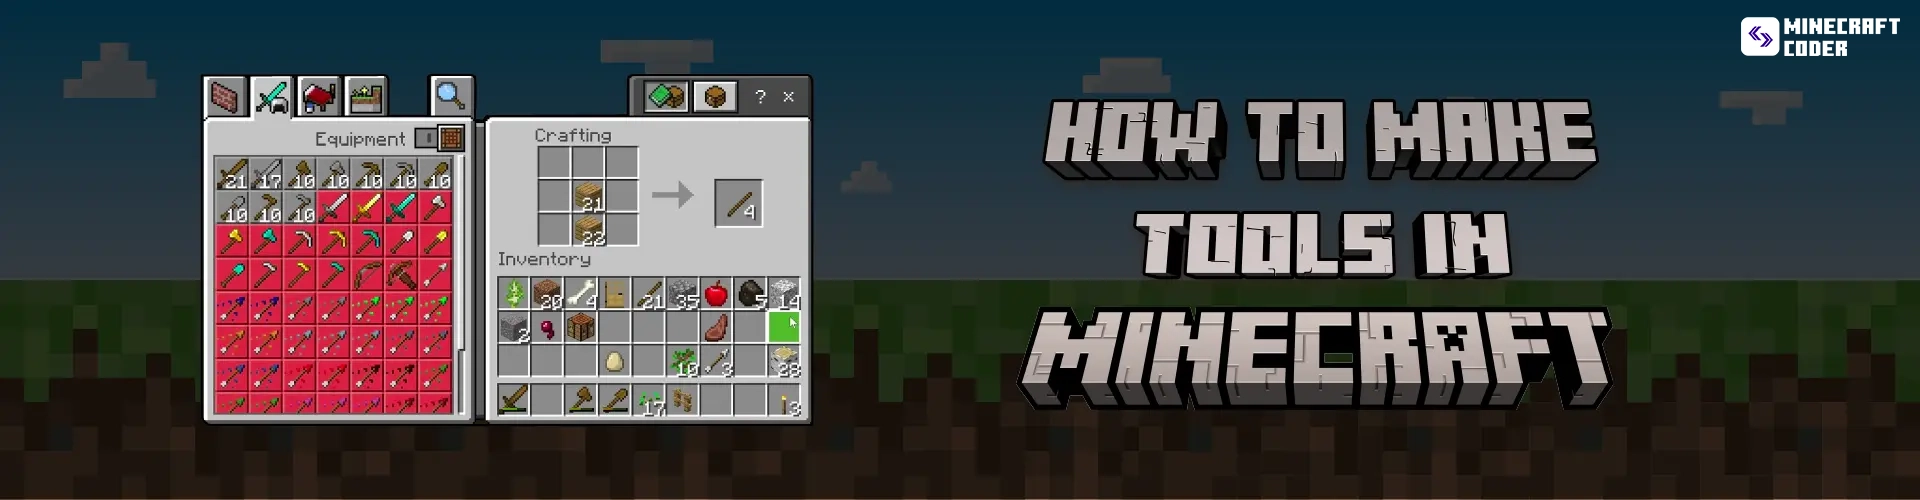 How To make tools in minecraft